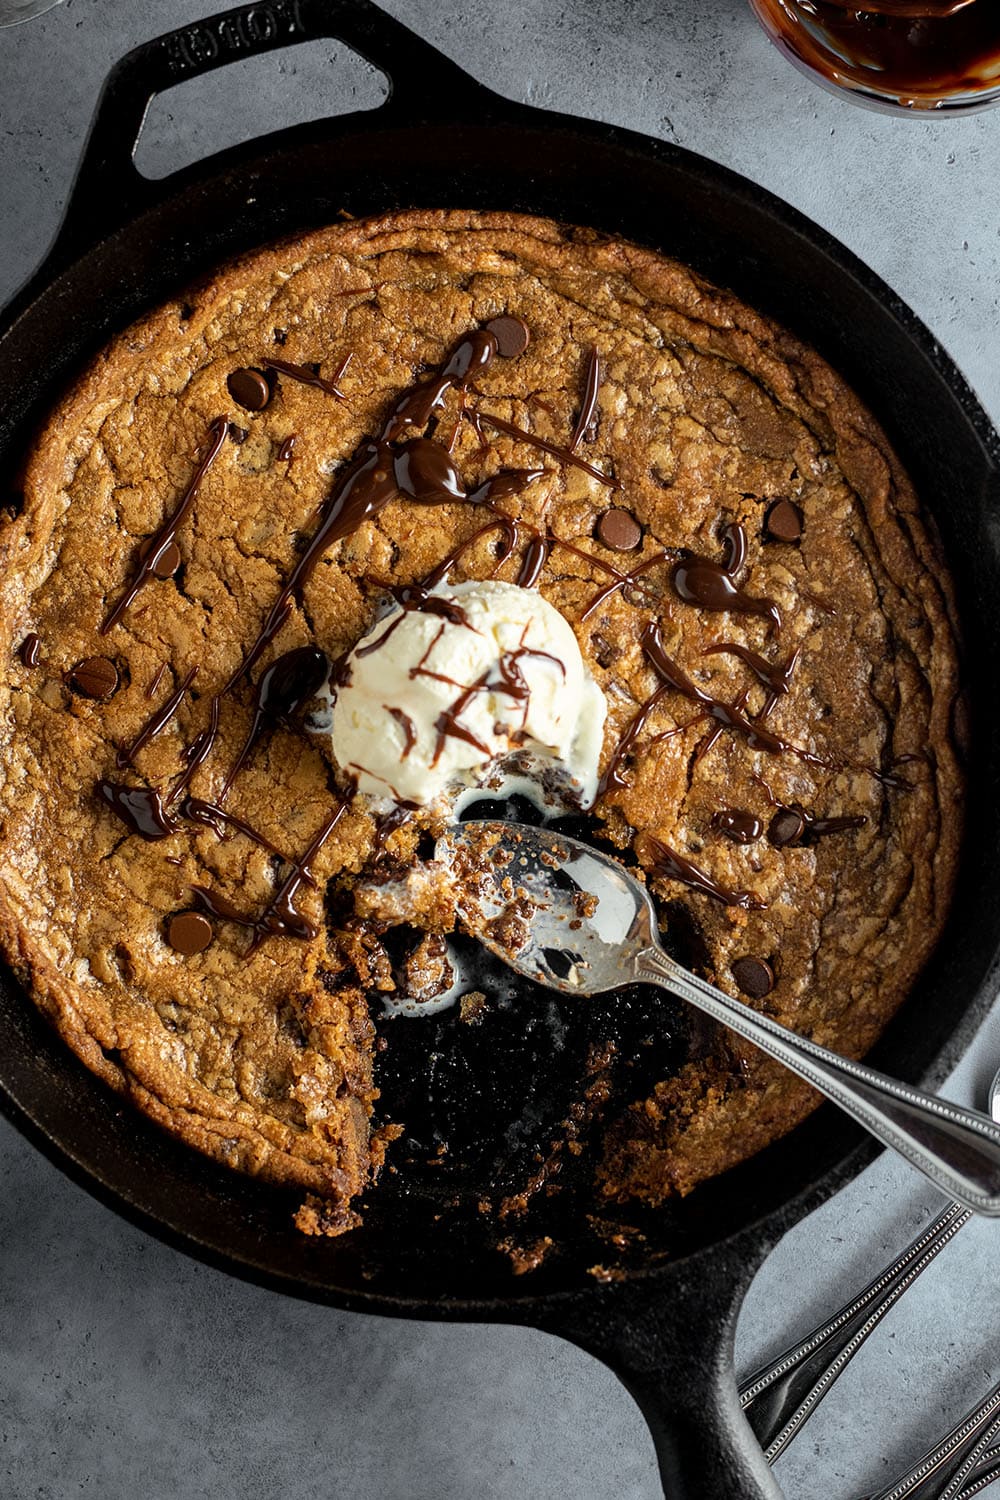 How To Make Cookies In An Electric Skillet